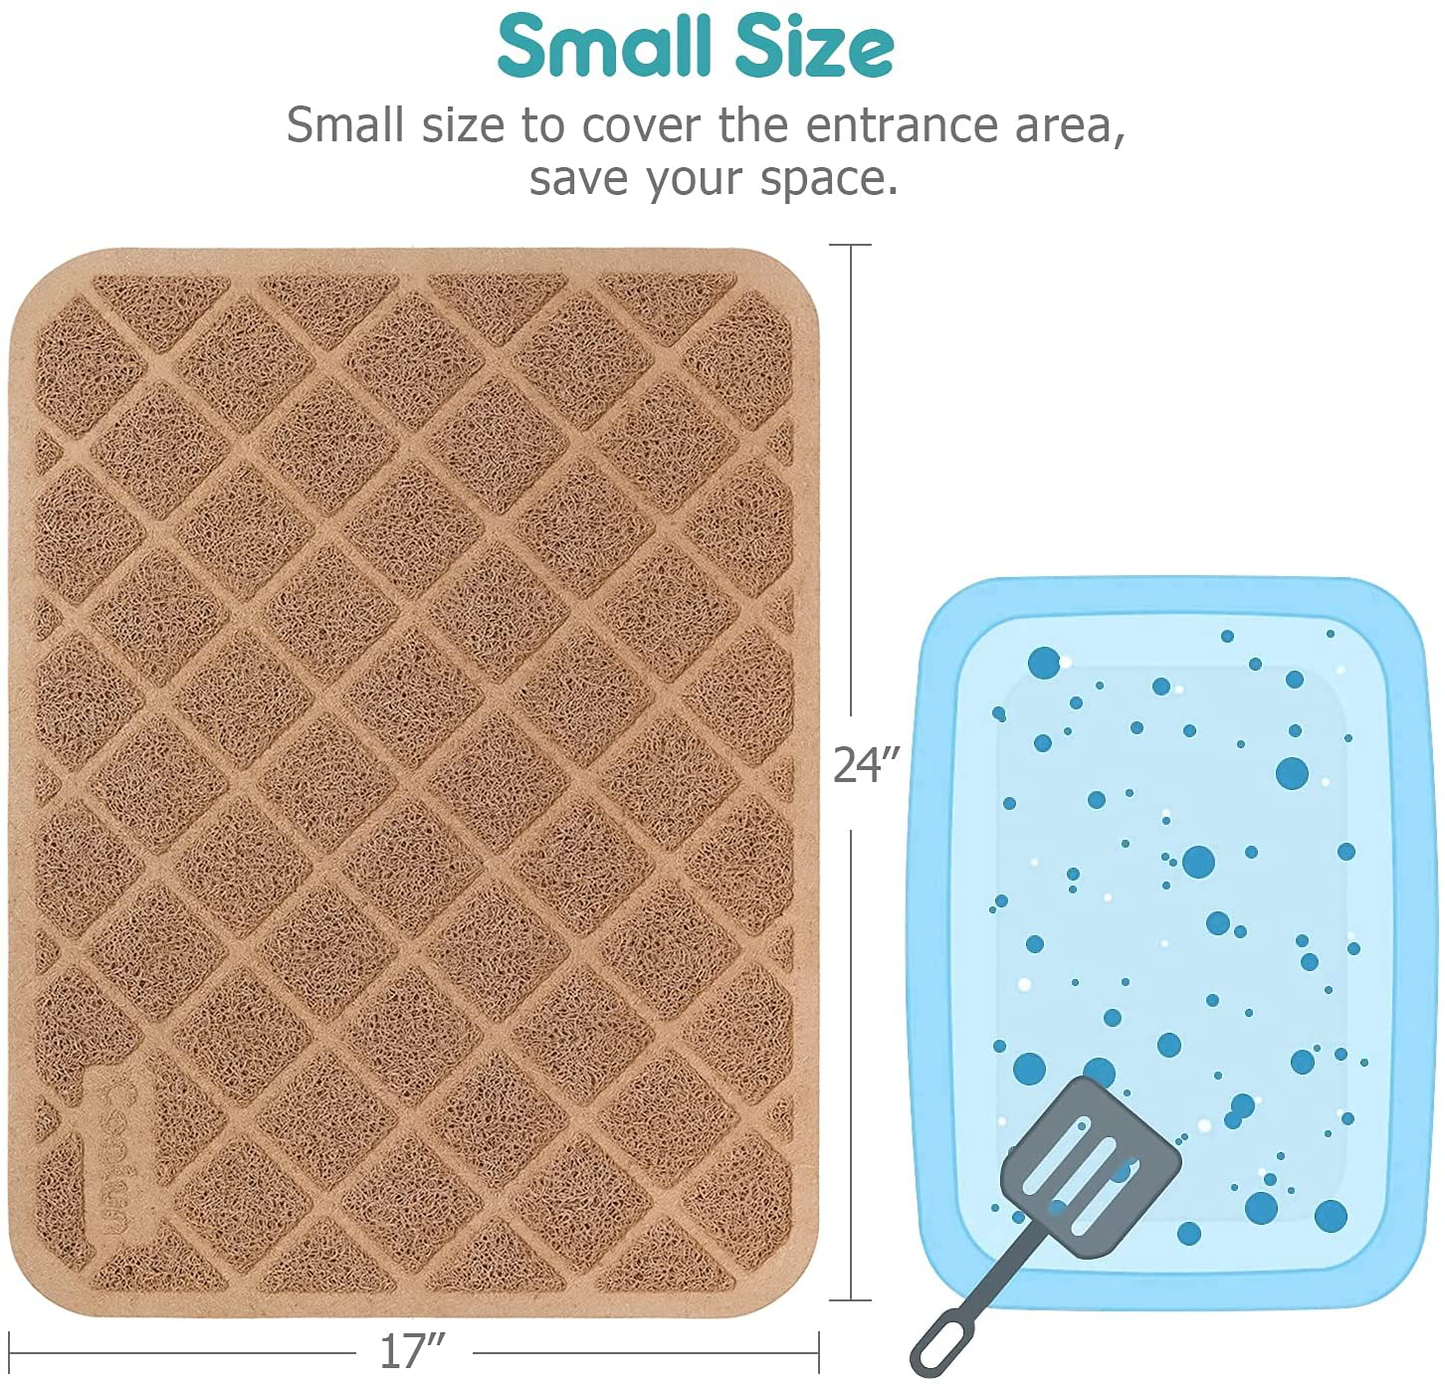 Conlun Cat Litter Mat Litter Trapping Mat, Premium Durable PVC Grid Mesh with Scatter Control, Non-Slip, Less Waste Cat Litter Box Mat, Soft on Kitty’S Paws, Urine Waterproof, Washable Easy Clean